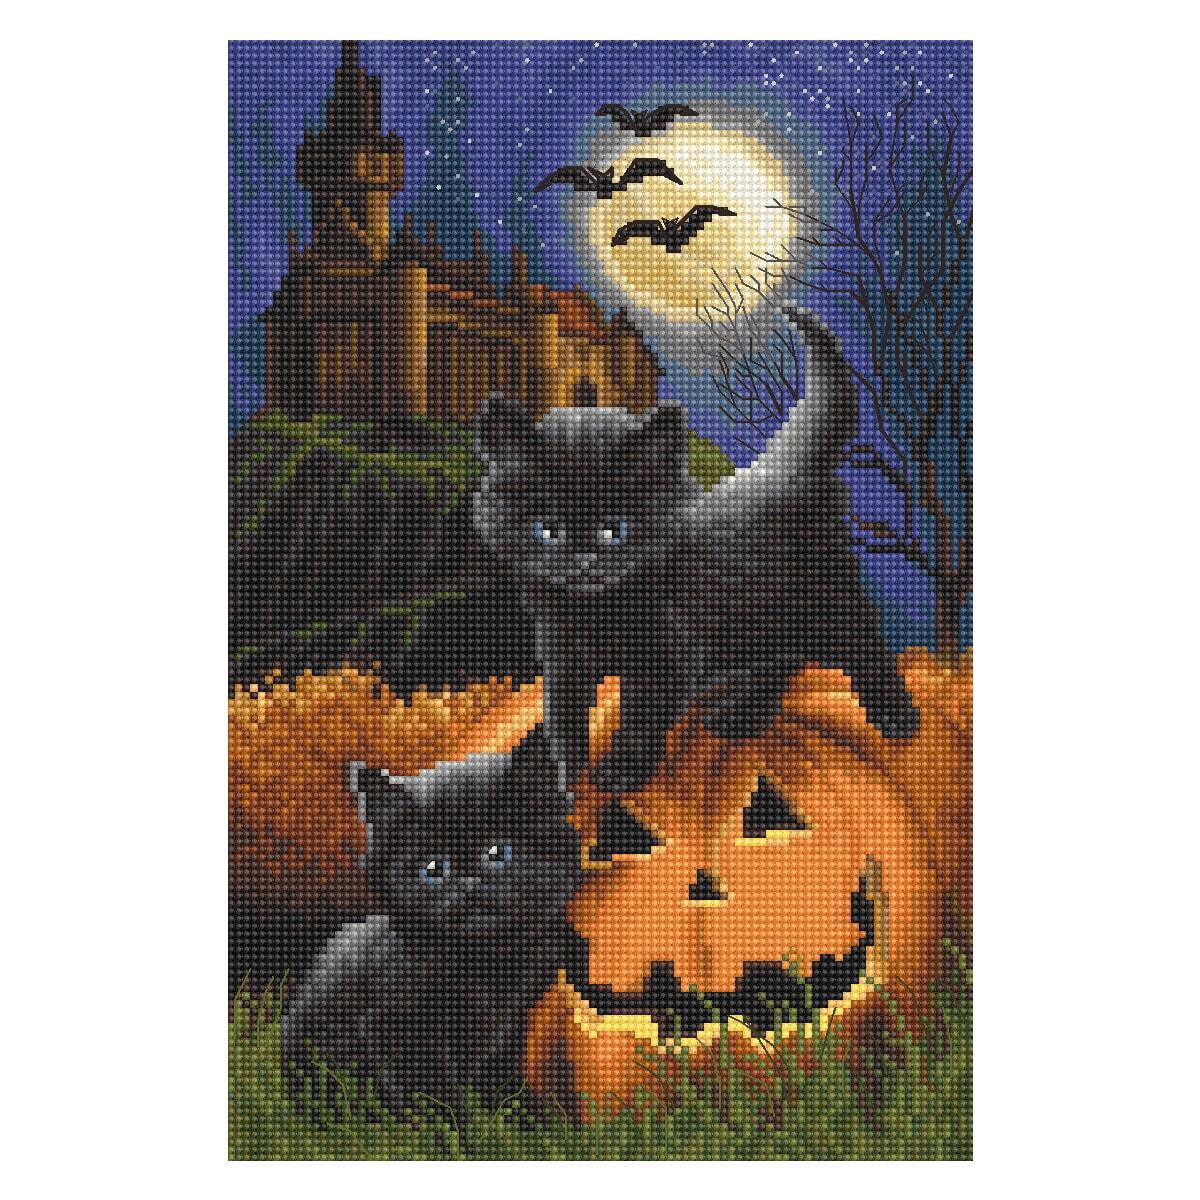 Letistitch counted cross stitch kit "Did we scare...